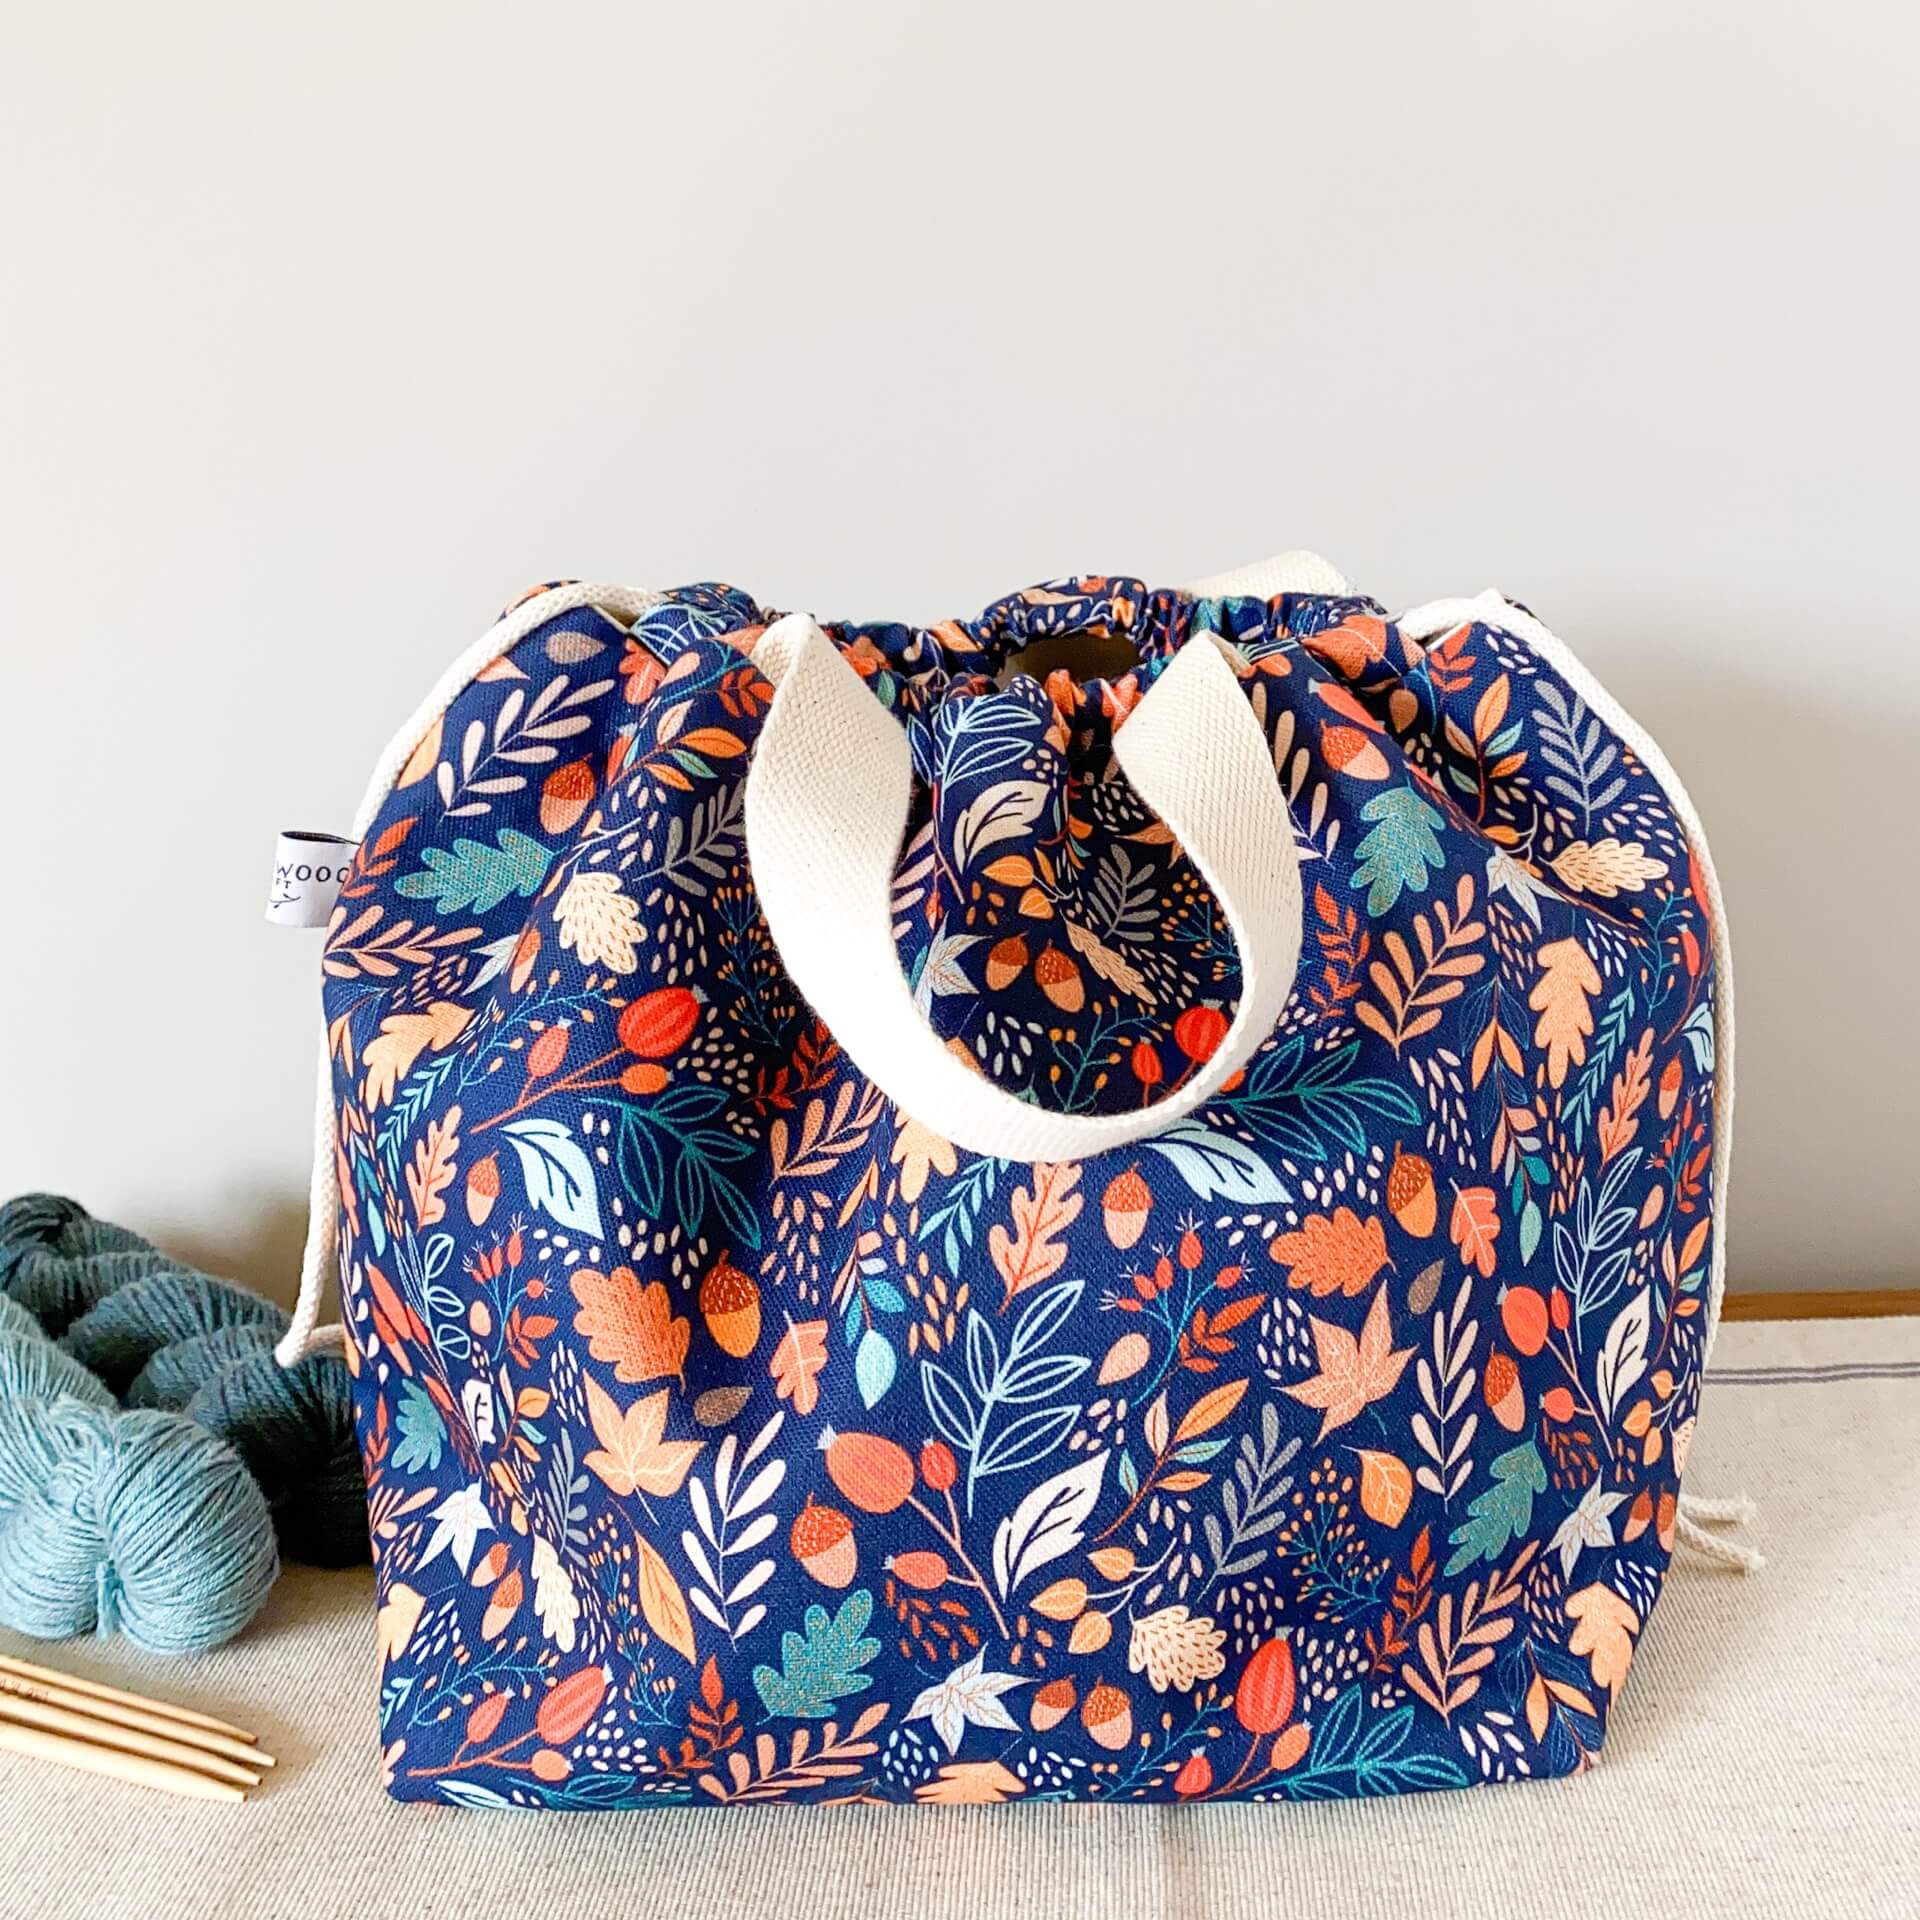 A knitting project bag sits on a table. The bag is made from a fabric that features a bright leaf and acorn print. The top of the bag is pulled closed hiding the contents of the bag. 